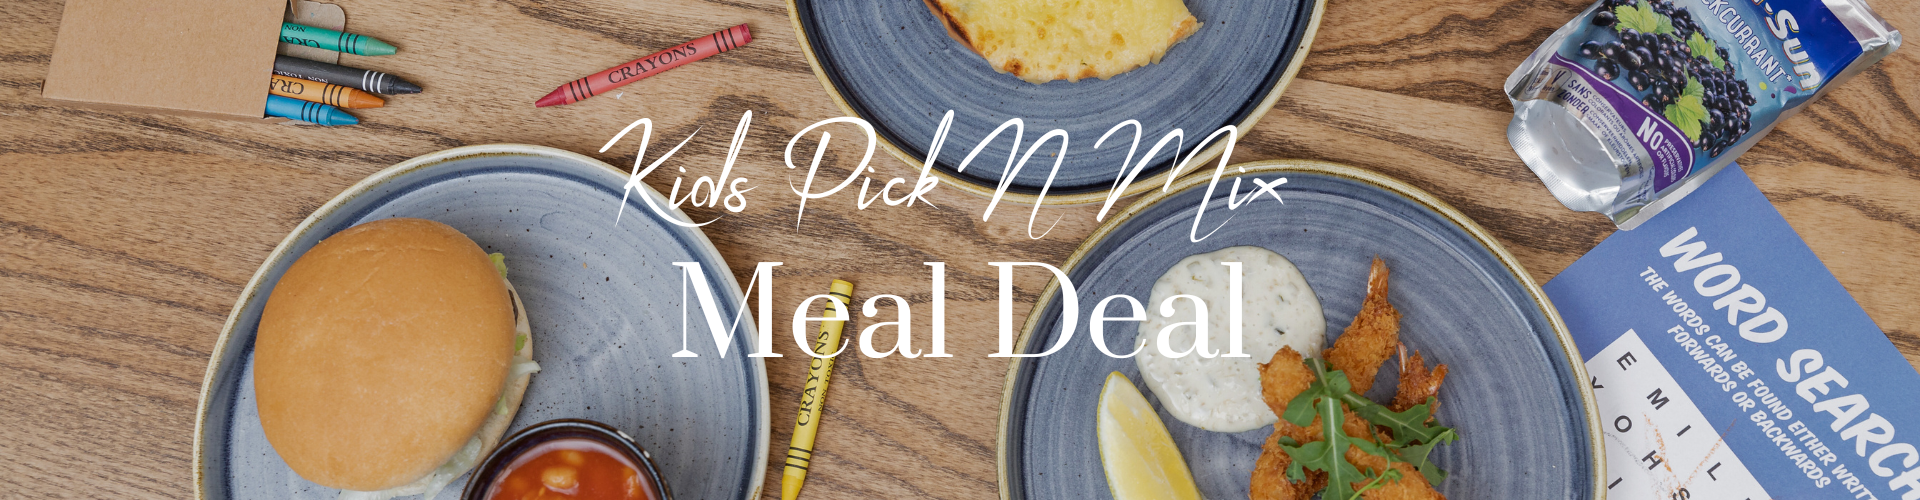 Kids Meal Deal available at The Old Swan 